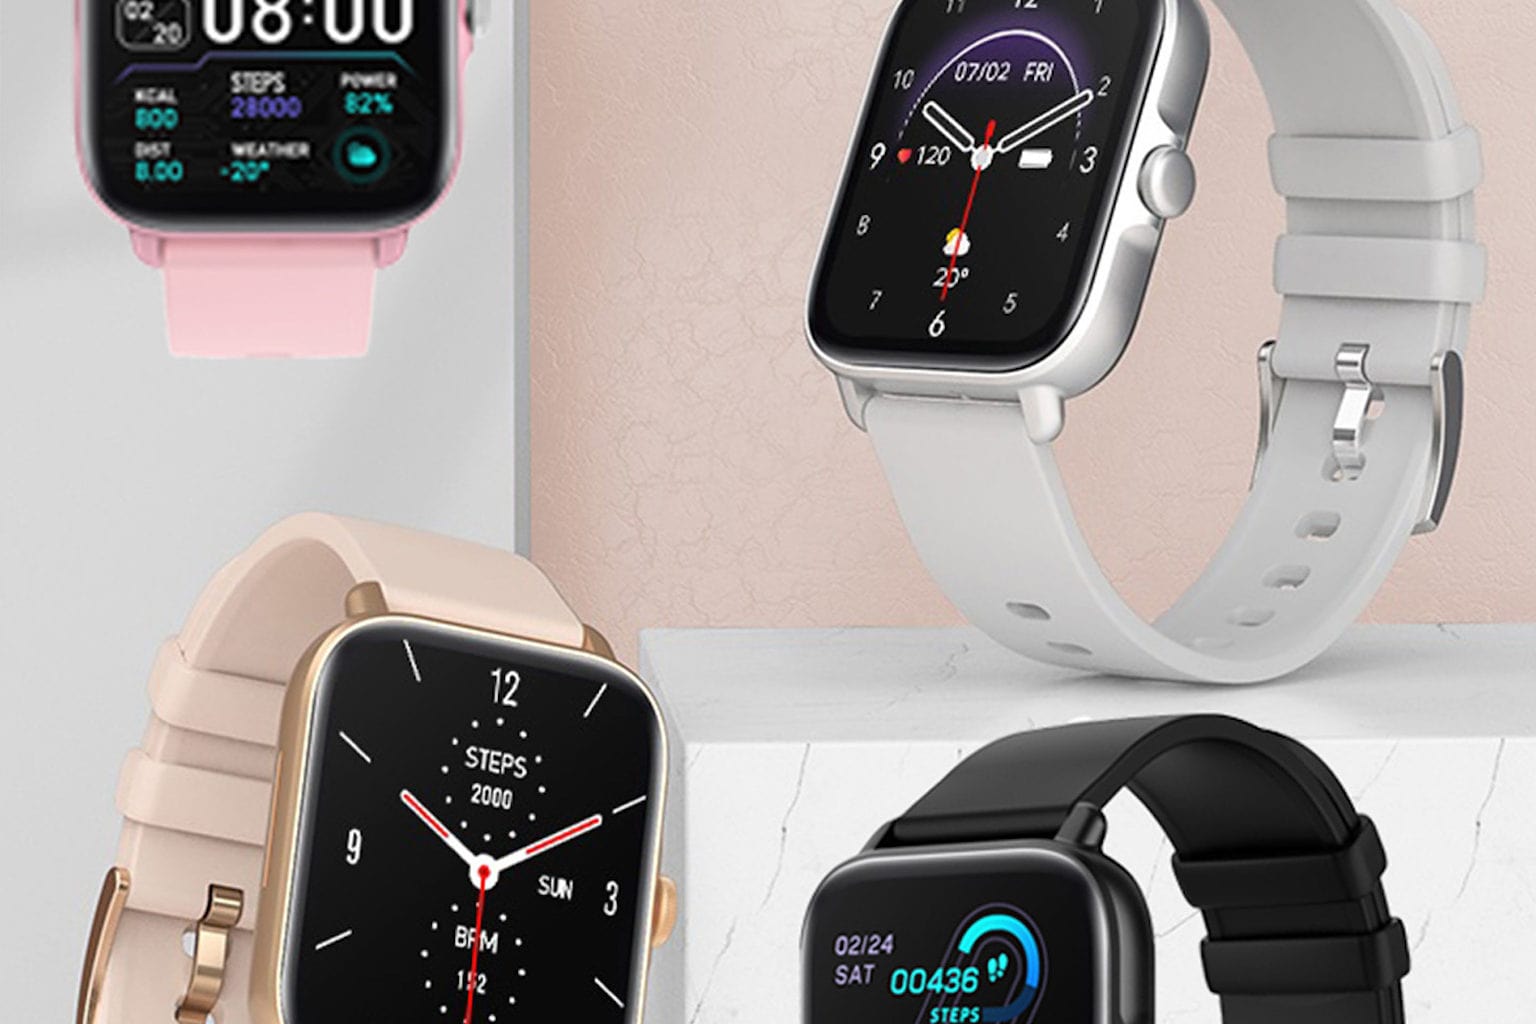 Grab this top-rated Apple Watch alternative for less than $40.